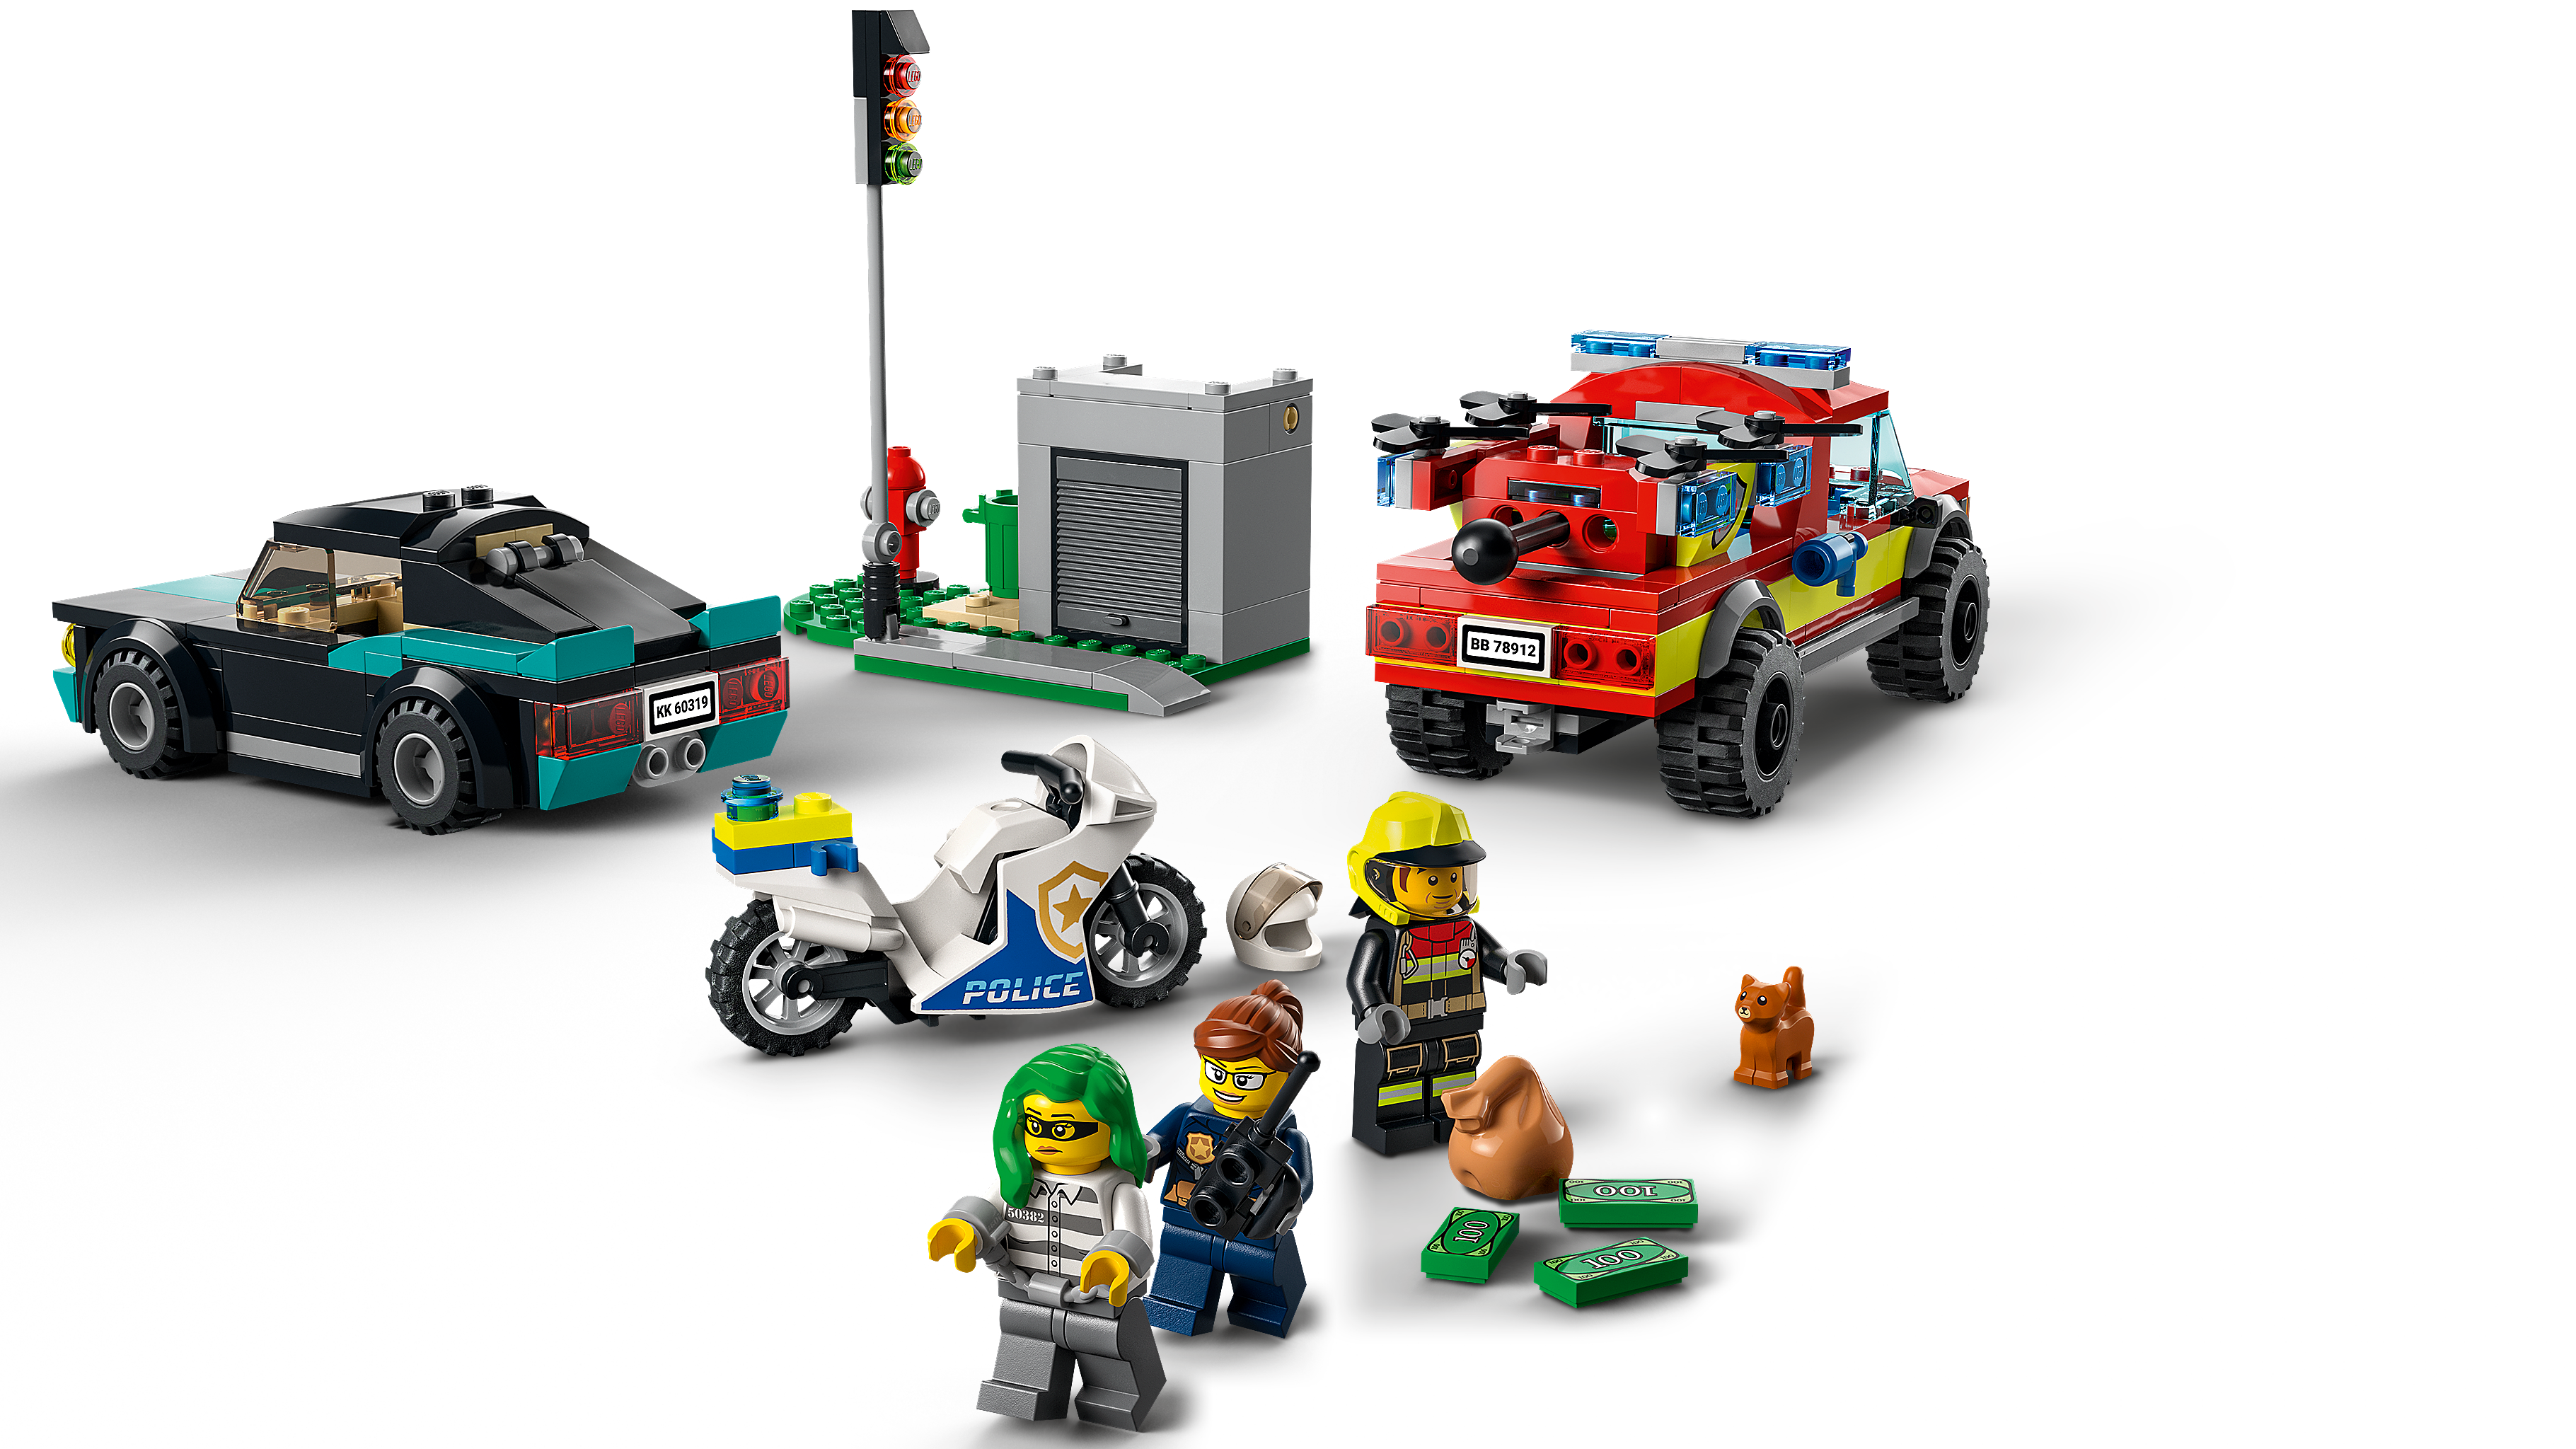 Lego 60319 Fire Rescue Police Chase